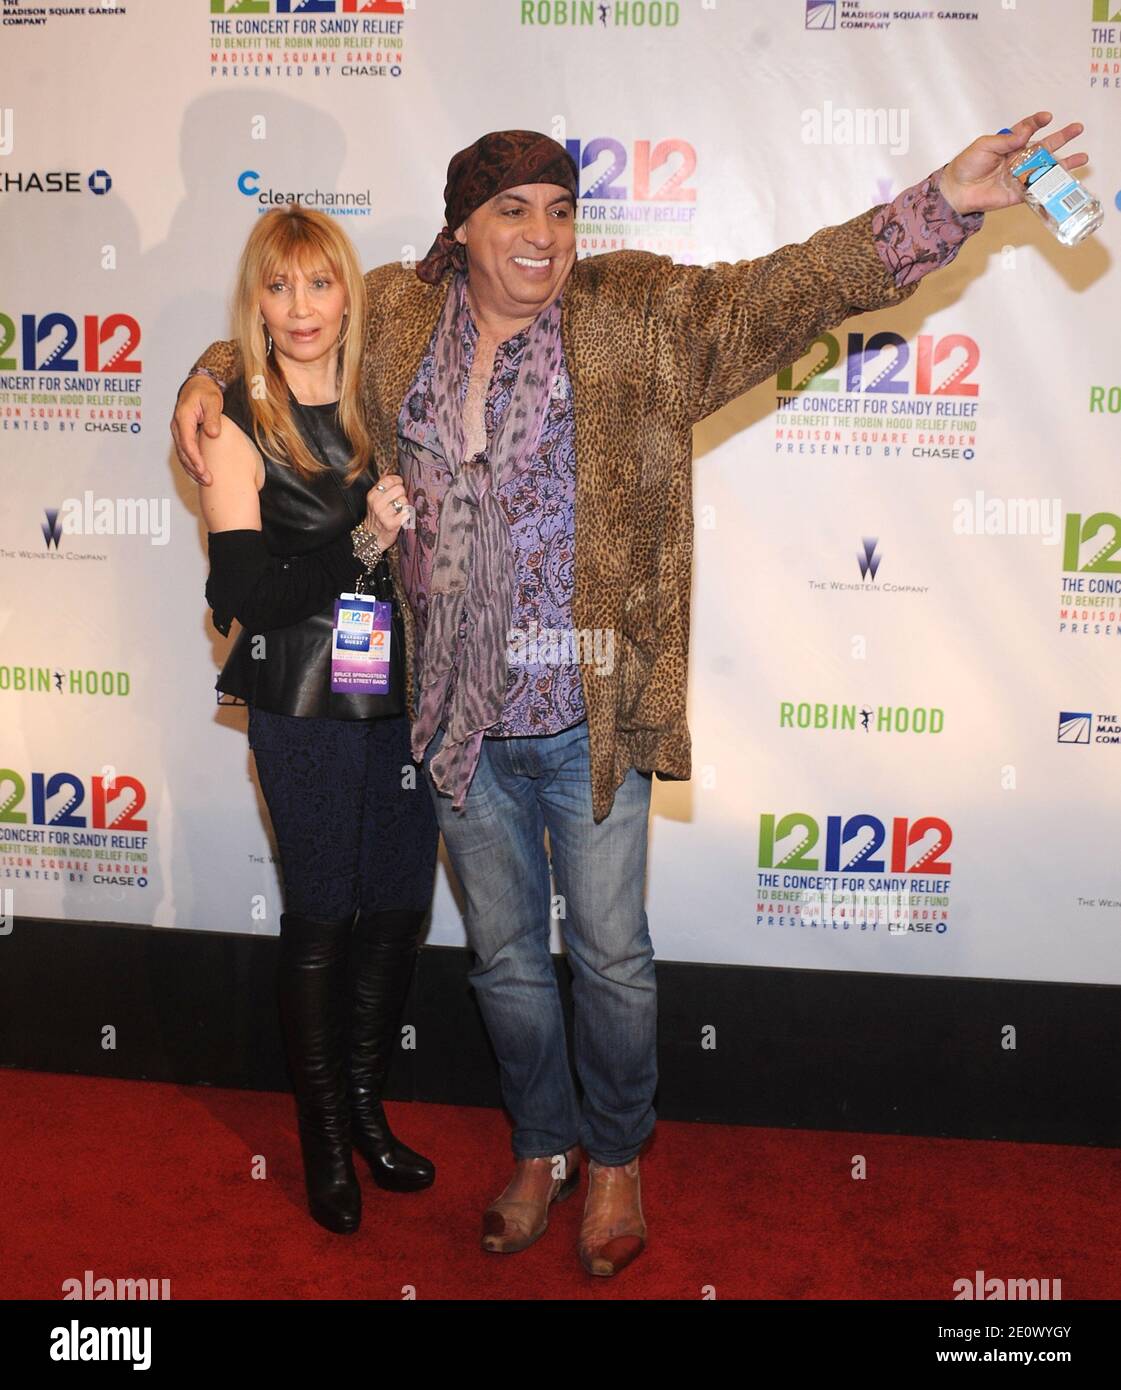 Steven Van Zandt and Maureen Van Zandt in the press room during '12-12-12' The Concert for Sandy Relief to benefit the Robin Hood Relief Fund presented by The Madison Square Garden Company and The Weinstein Company at the Madison Square Garden in New York City, NY, USA on December 12, 2012. Nearly 2 billion people have access to the benefit concert via television, radio and the internet. Photo by Brad Barket/ABACAPRESS.COM Stock Photo